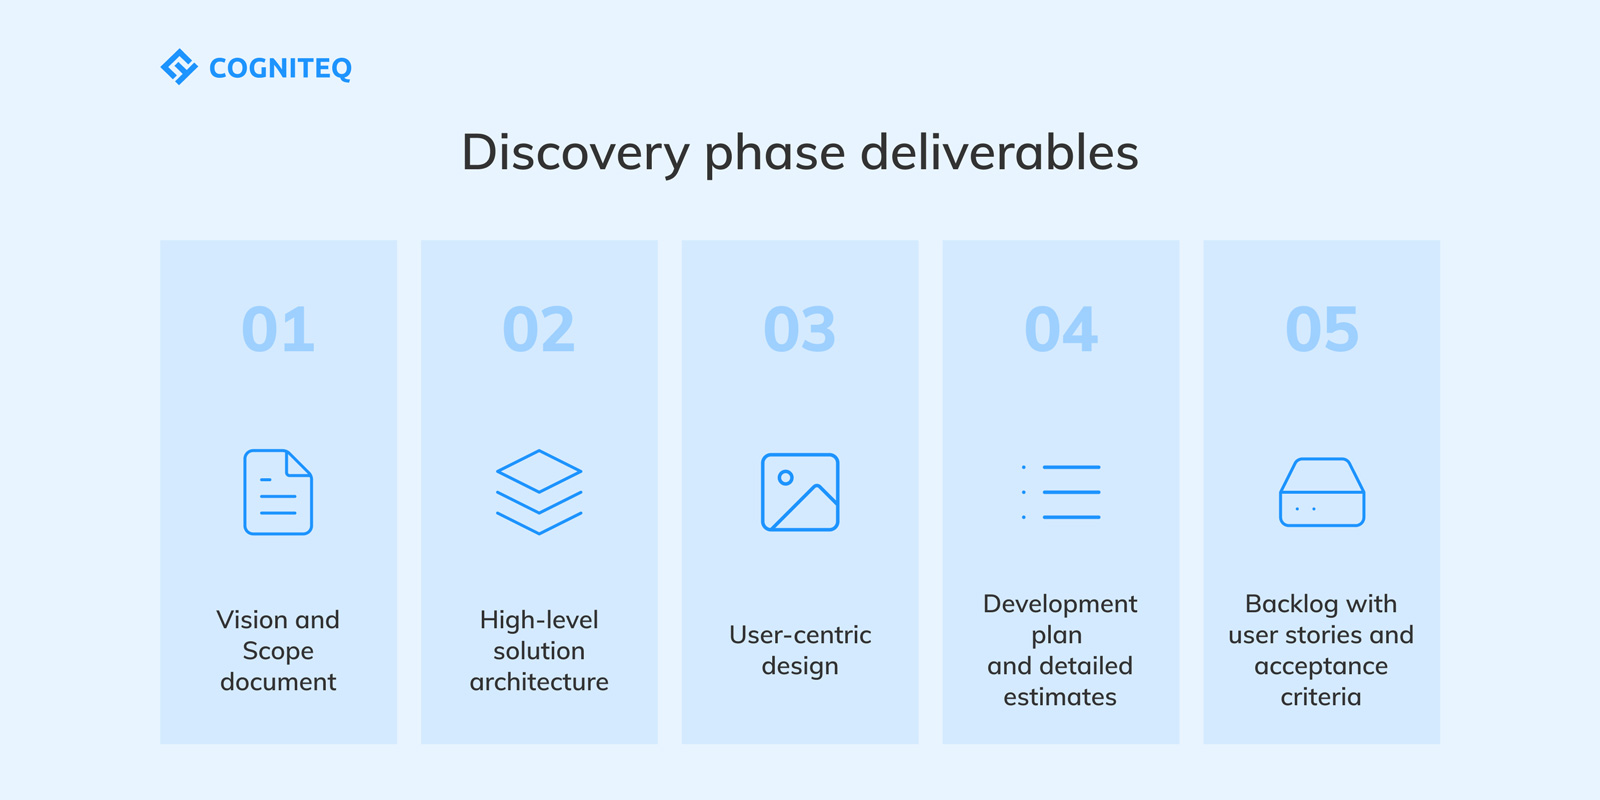 Discovery phase deliverables